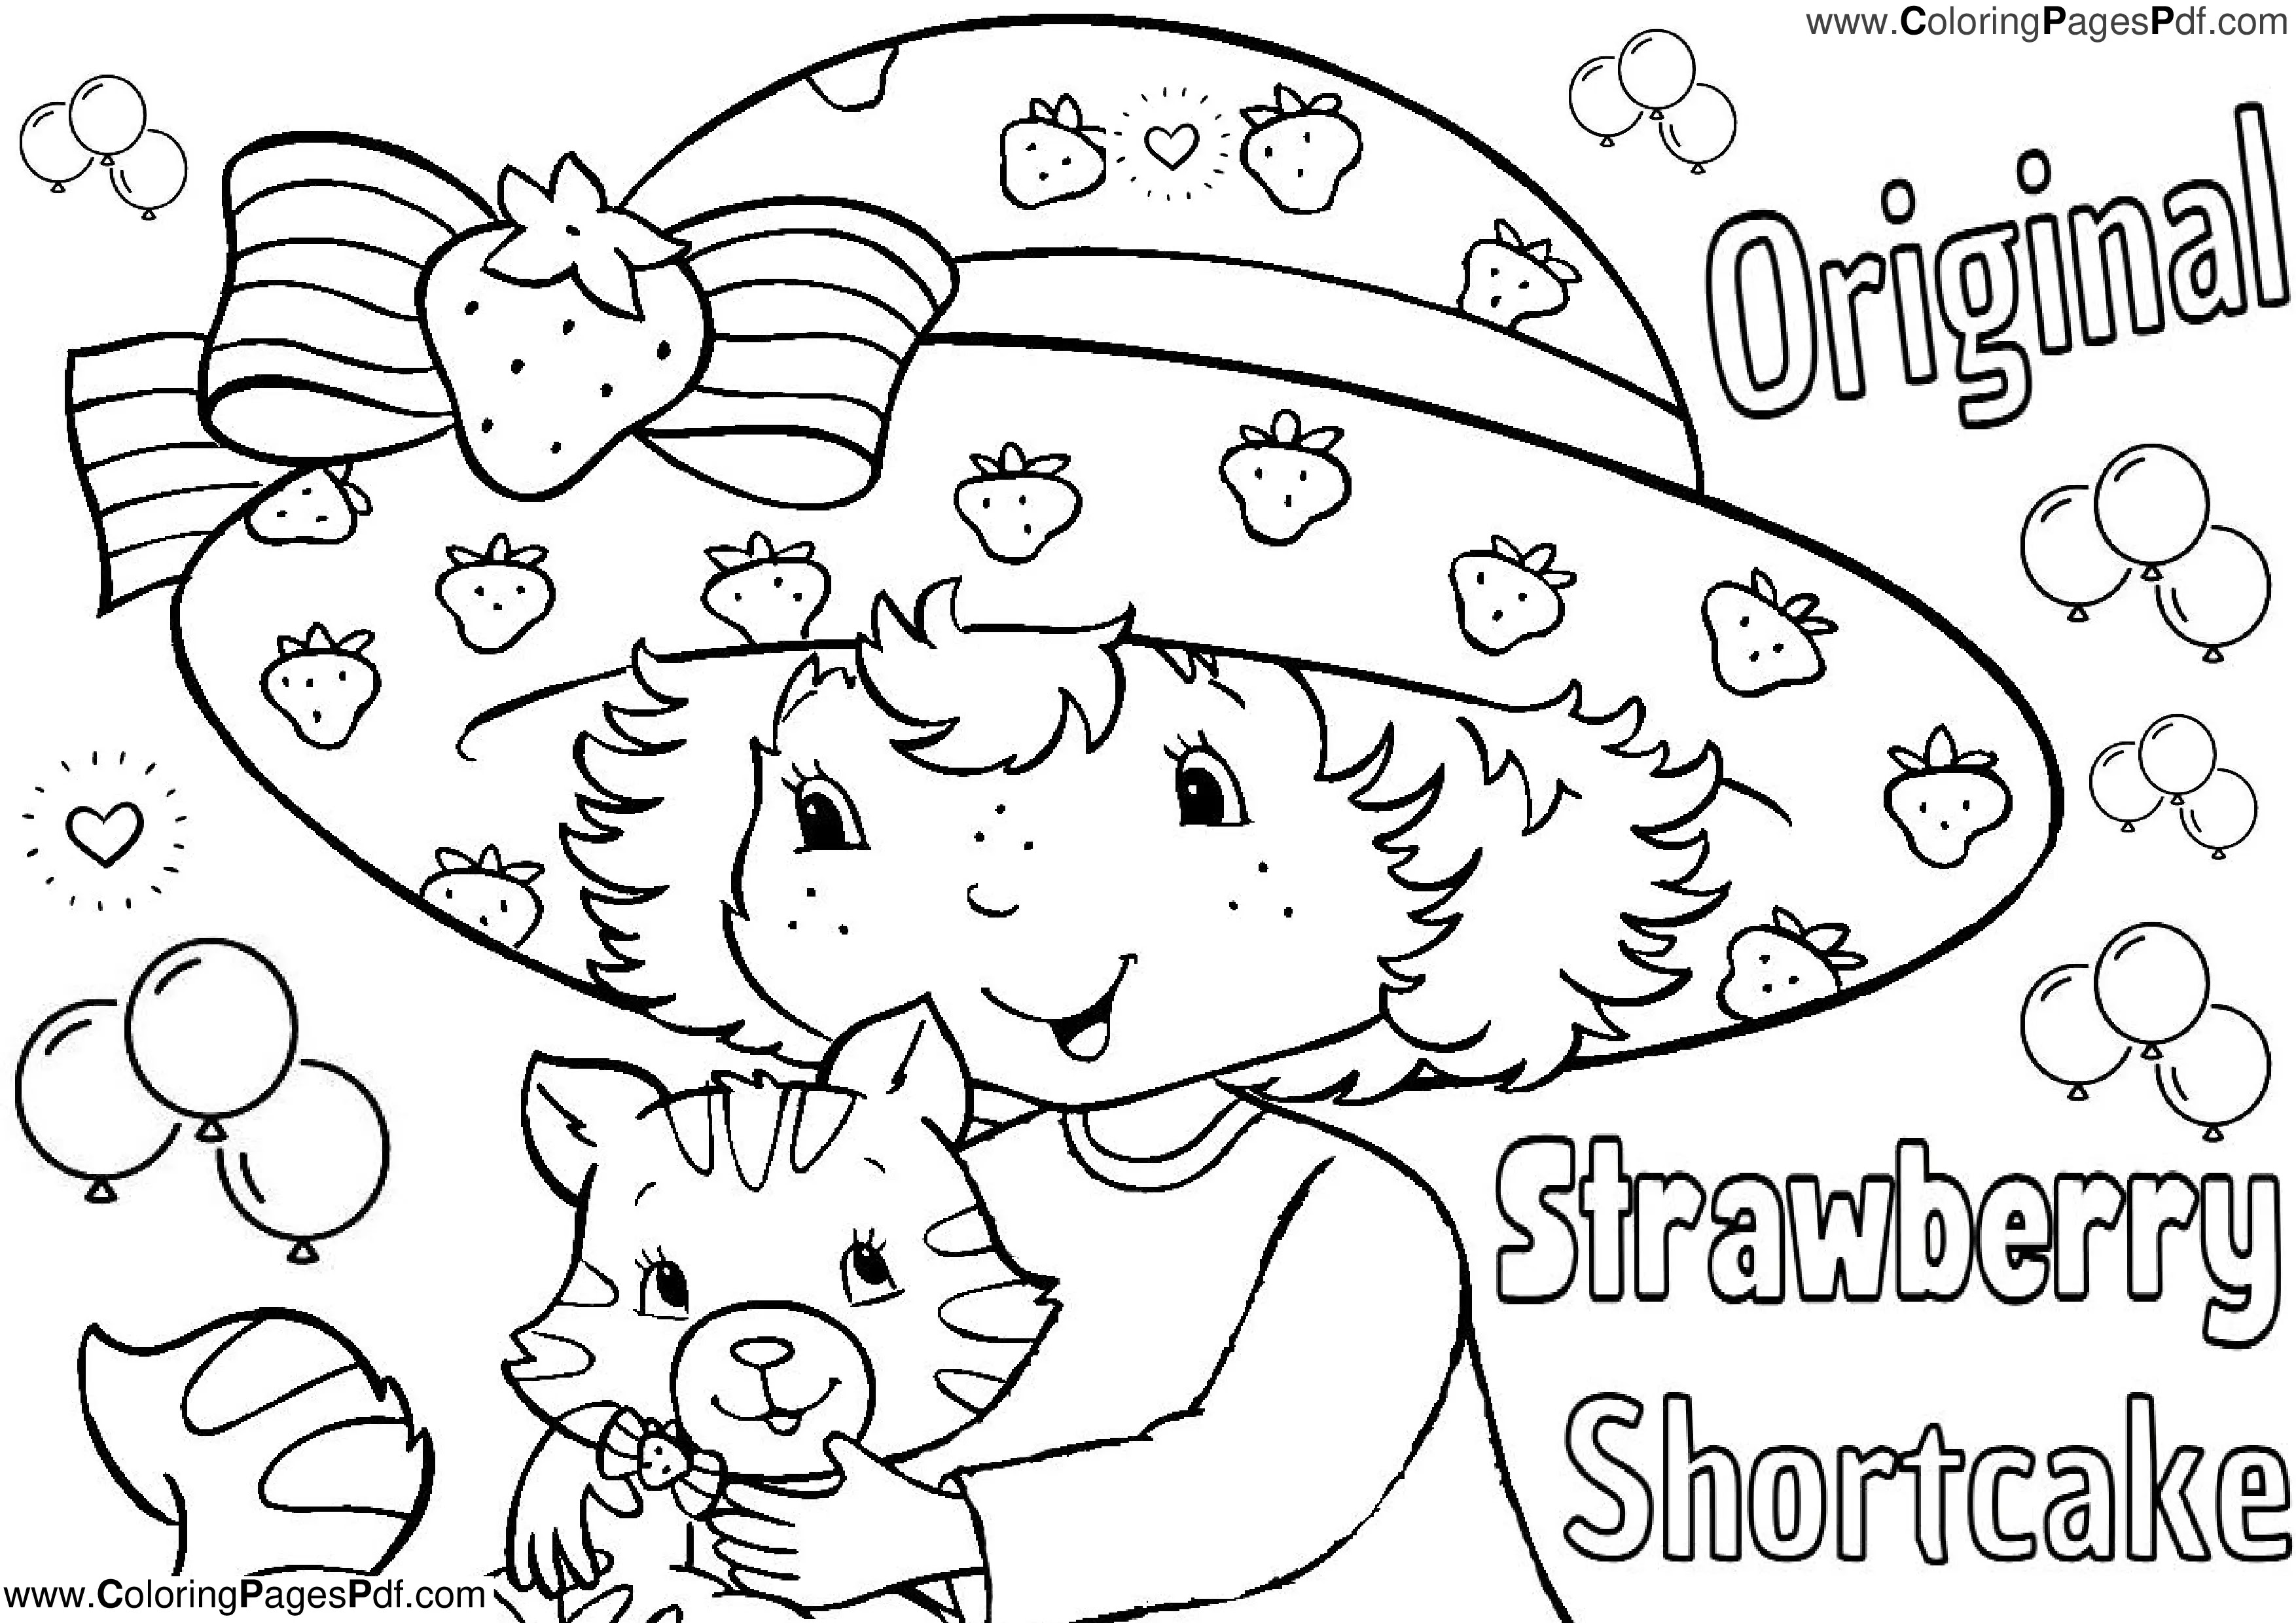 strawberry shortcake coloring pages,strawberry shortcake coloring book,blue bunny ice cream strawberry cheesecake,strawberry shortcake blue bunny,strawberry shortcake drumstick,strawberry shortcake stop and shop,mini strawberry shortcake,strawberry shortcake ice cream cake near me,strawberry shortcake longos,best strawberry shortcake near me,strawberry shortcake ben and jerry's,baskin robbins strawberry shortcake,strawberry shortcake bakery near me,nestle strawberry shortcake,strawberry shortcake paris baguette